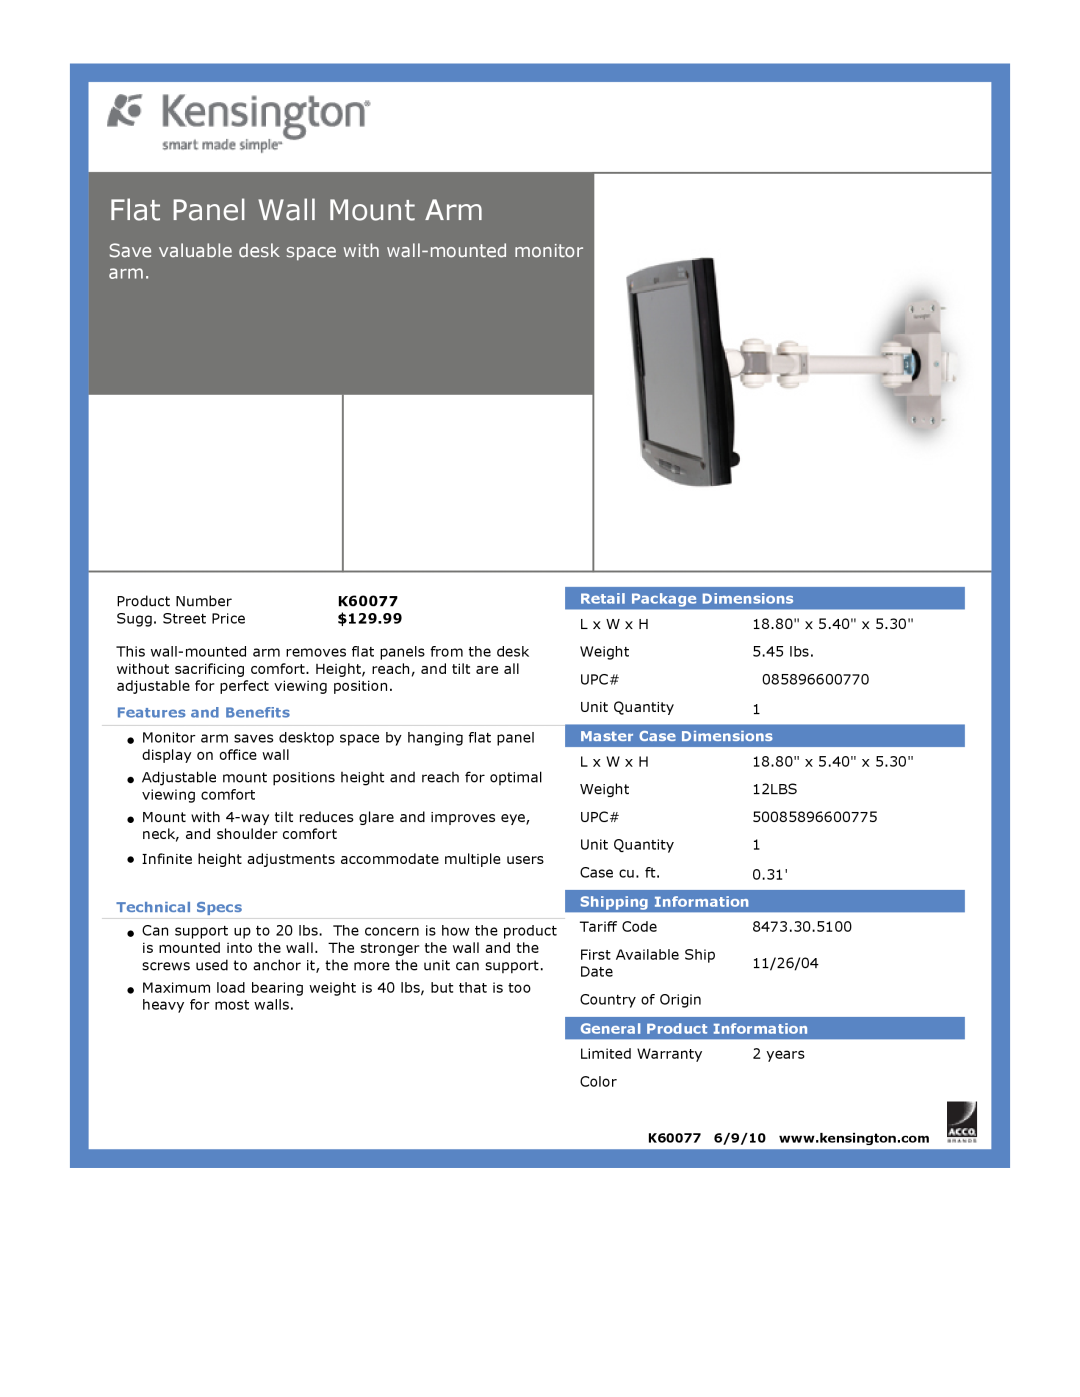 Kensington EU64325 Flat Panel Wall Mount Arm, K60077, Features and Benefits, Technical Specs, Retail Package Dimensions 